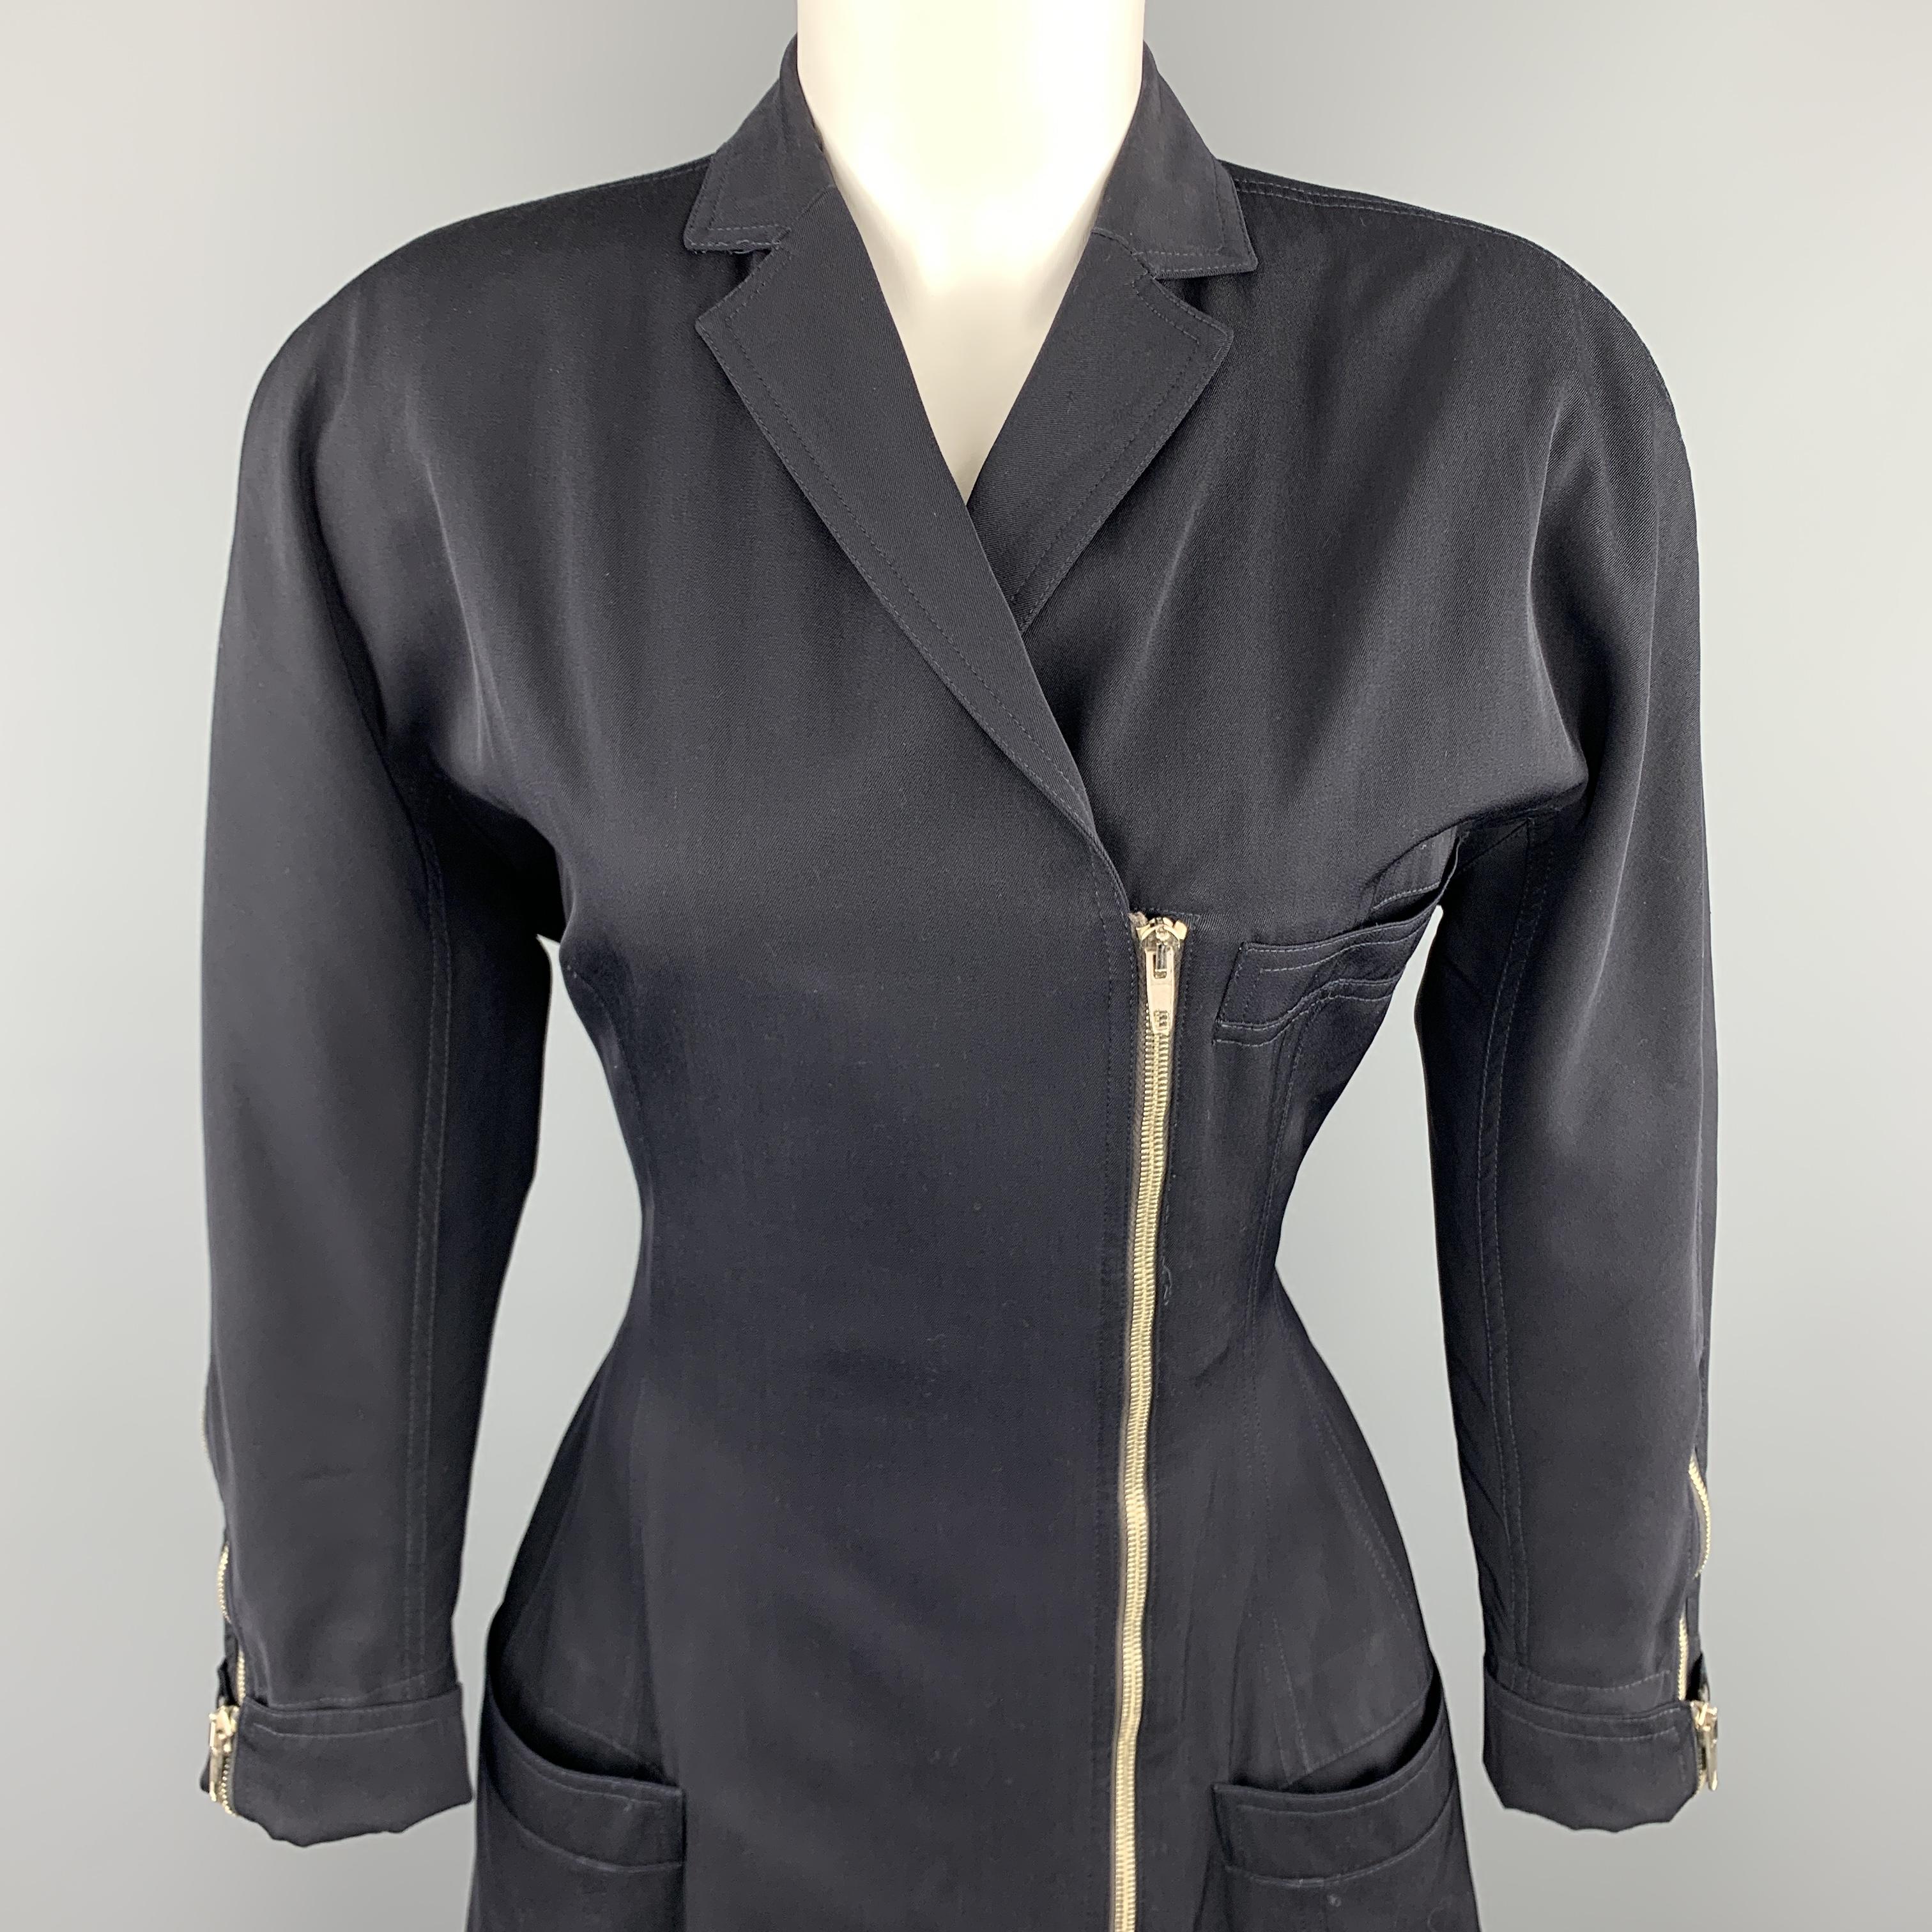 Vintage 1980's GIANNI VERSACE dress blazer dress comes in navy wool cotton blend twill with padded shoulders, notch lapel, asymmetrical zip closure, batwig sleeves with zip cuffs, tailored cinched waist, and hip pockets. Made in Italy.

Excellent